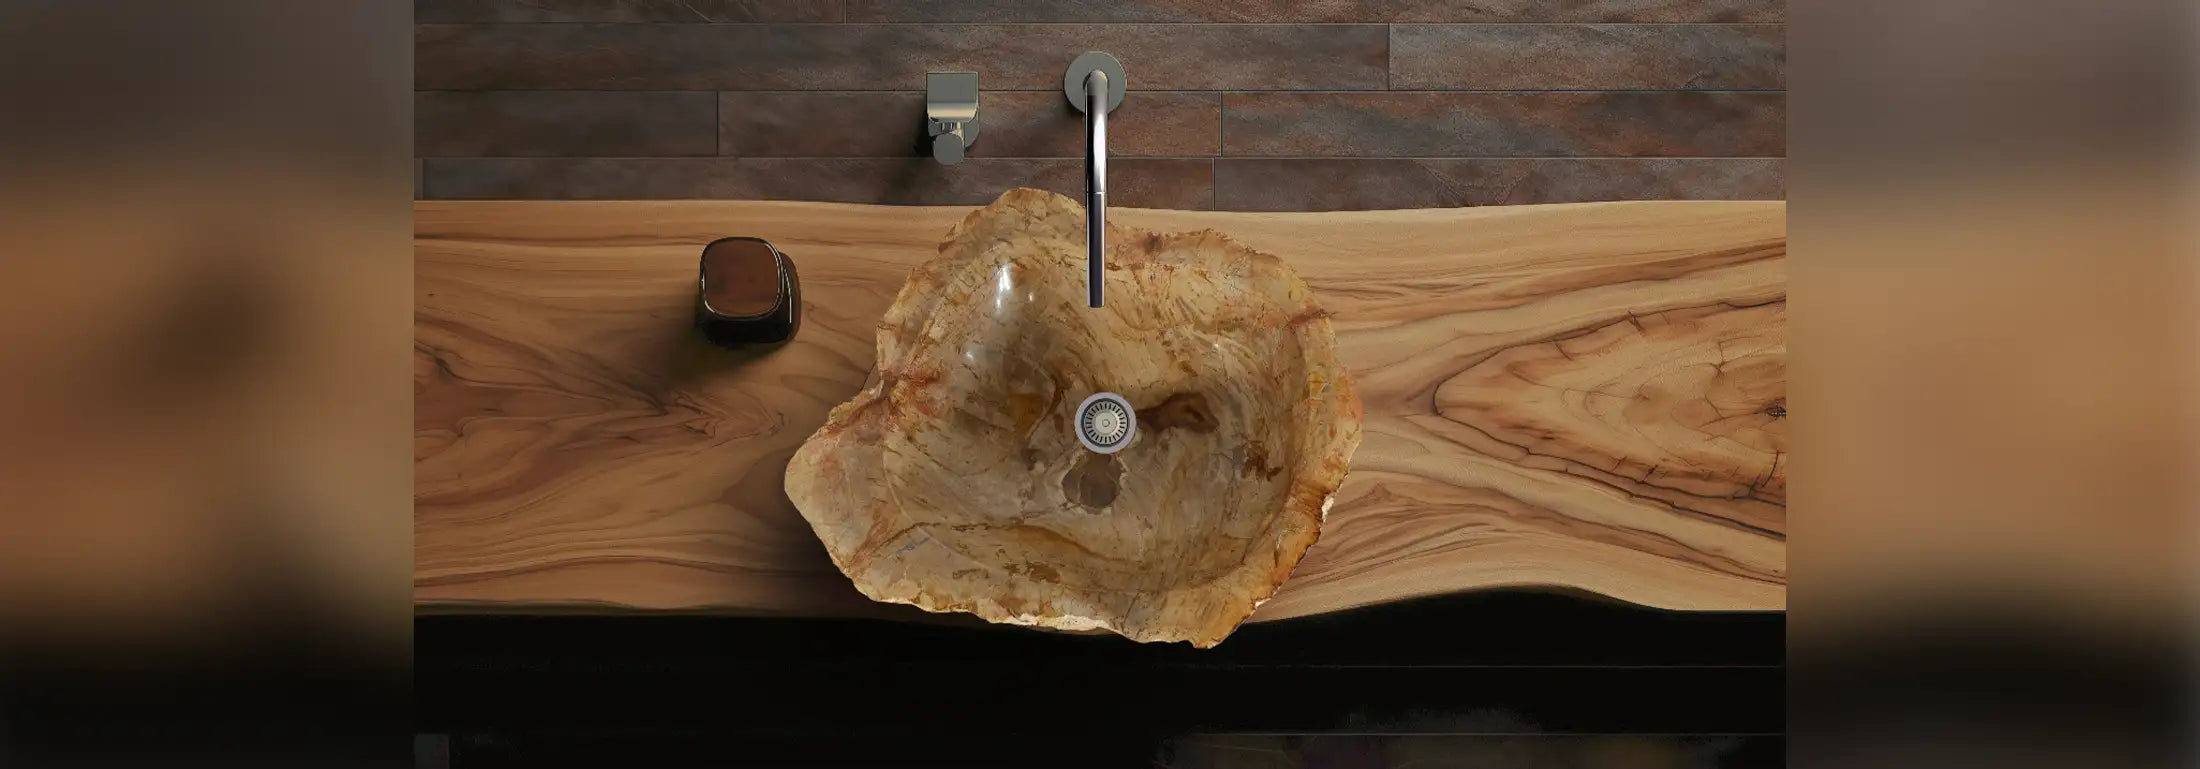 Petrified wood basin installed on countertop